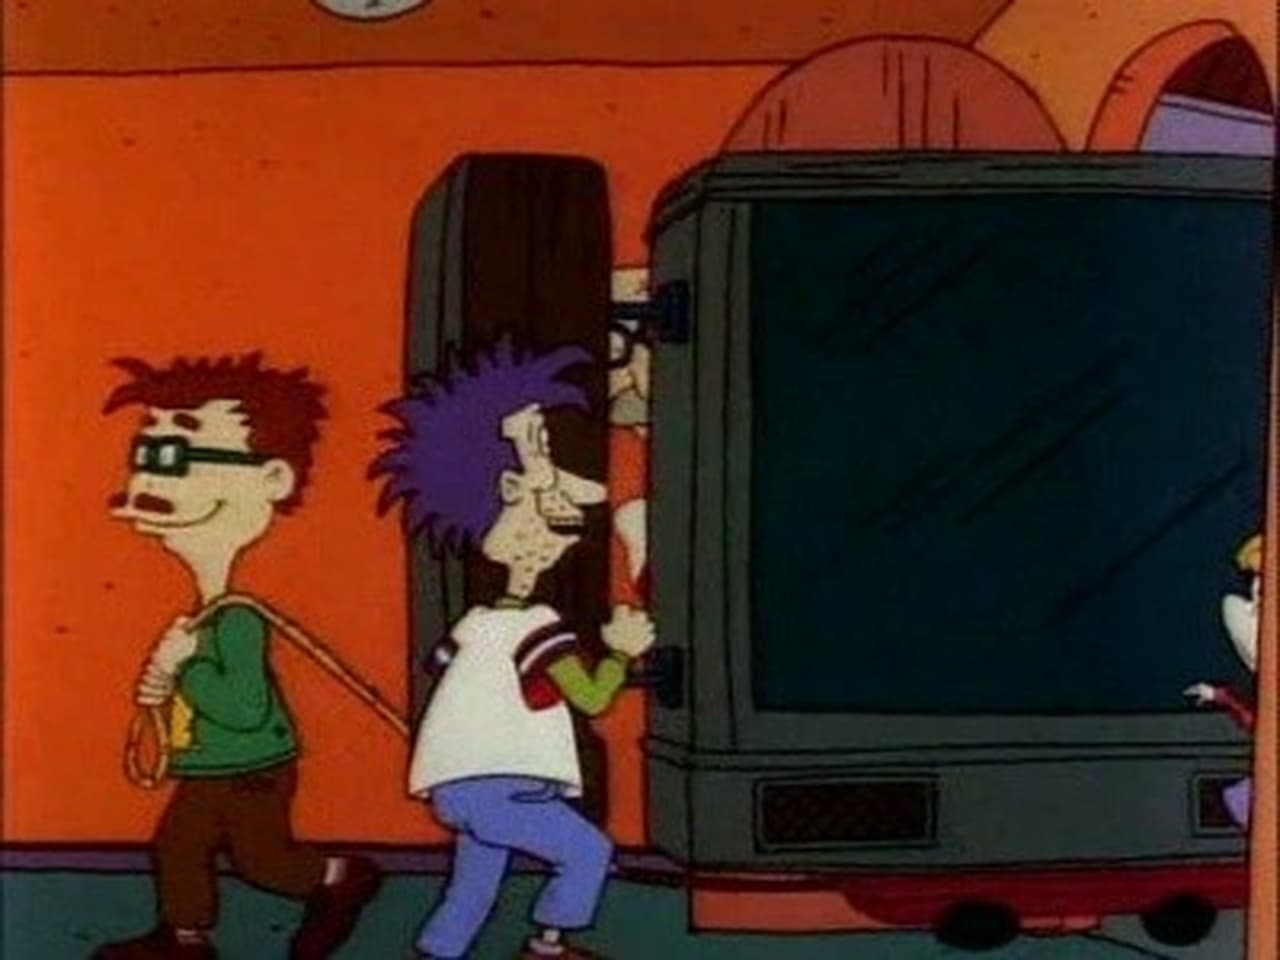 Rugrats, Season 1 - Touchdown Tommy image. 